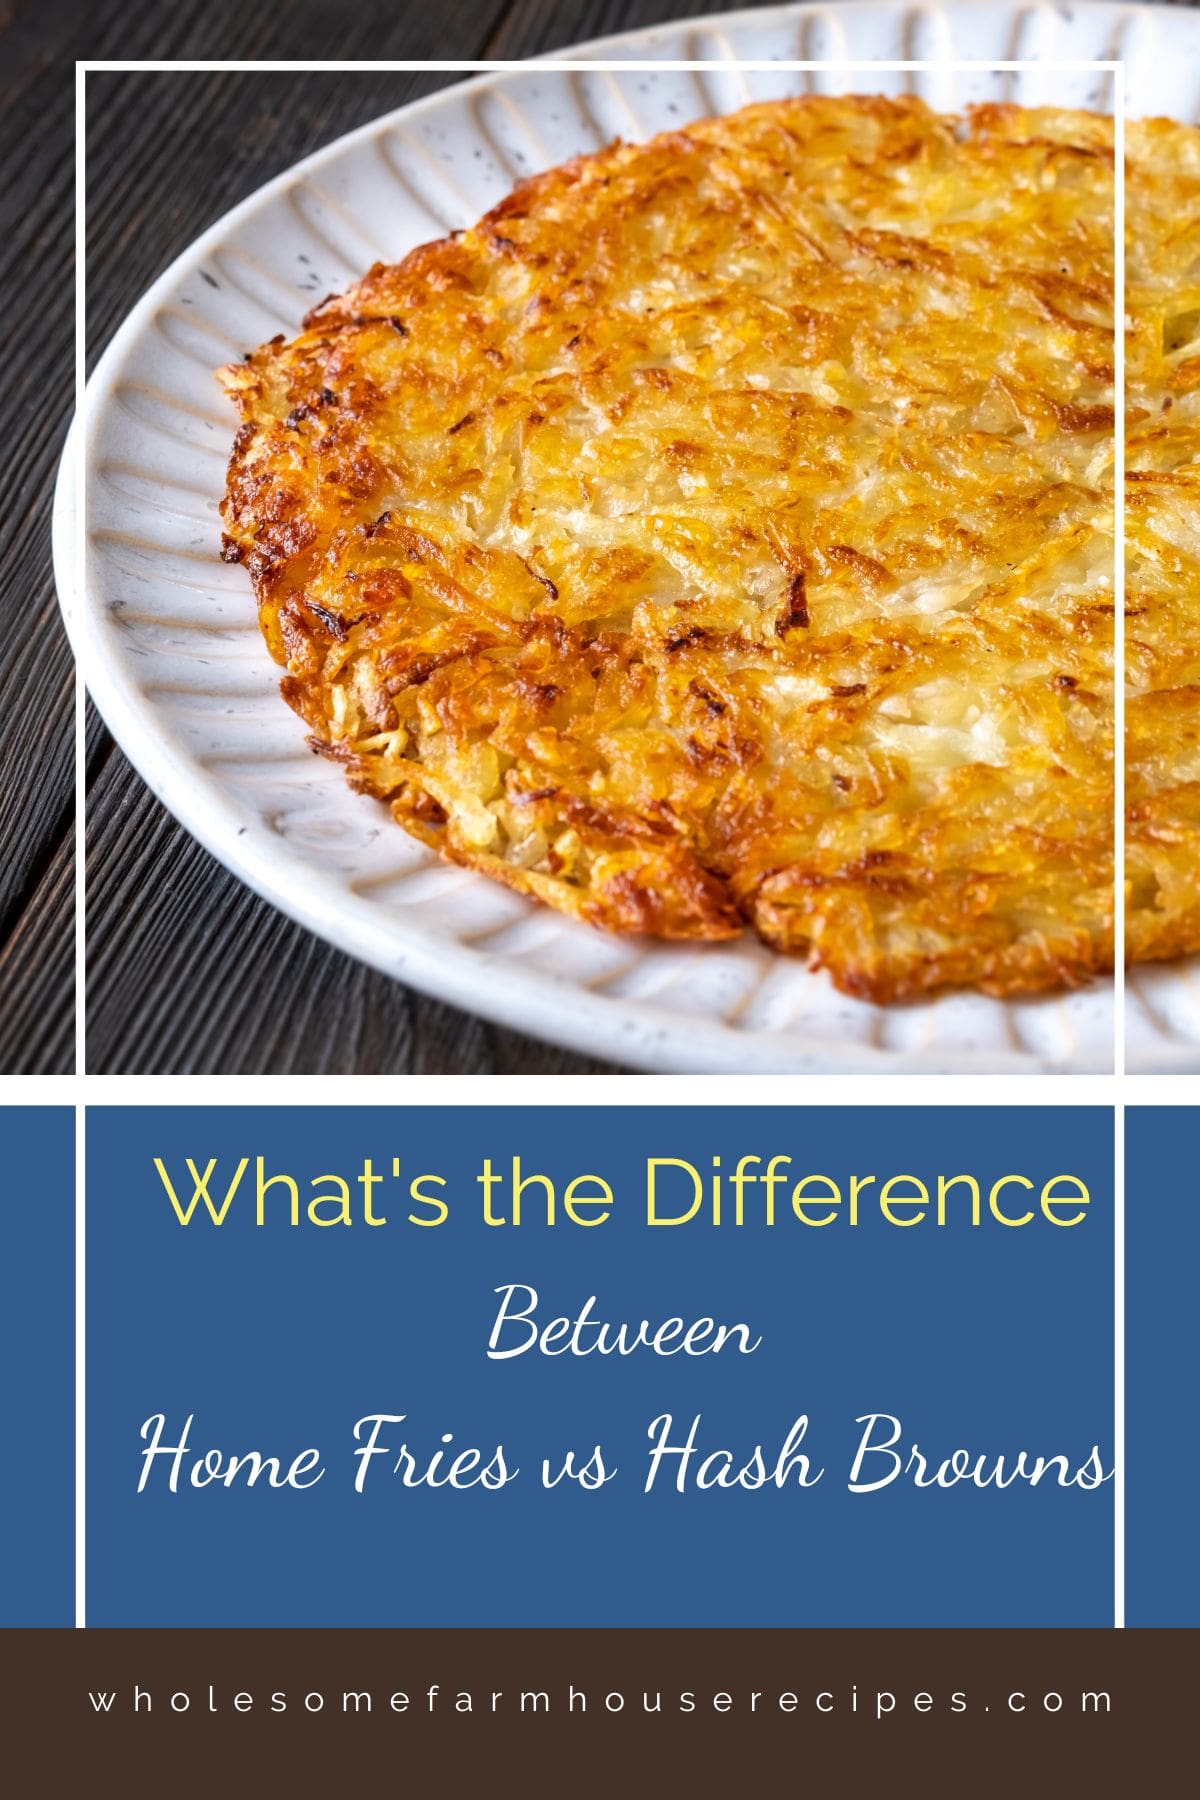 What's the Difference Between Home Fries vs Hash Browns